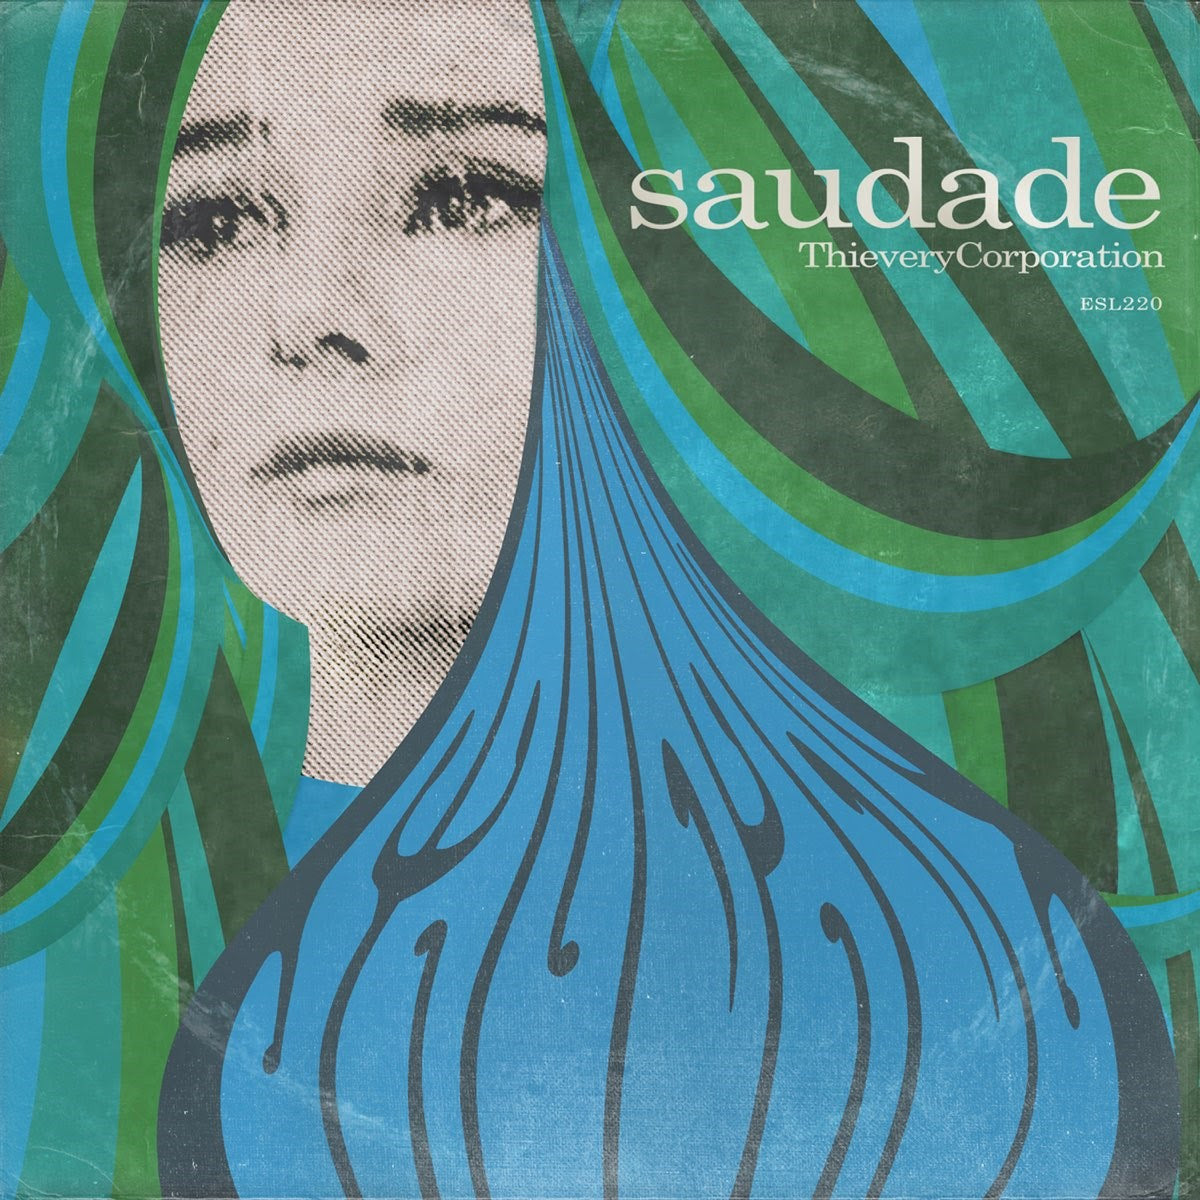 Thievery Corporation - Saudade | Buy the Vinyl LP from Flying Nun Records